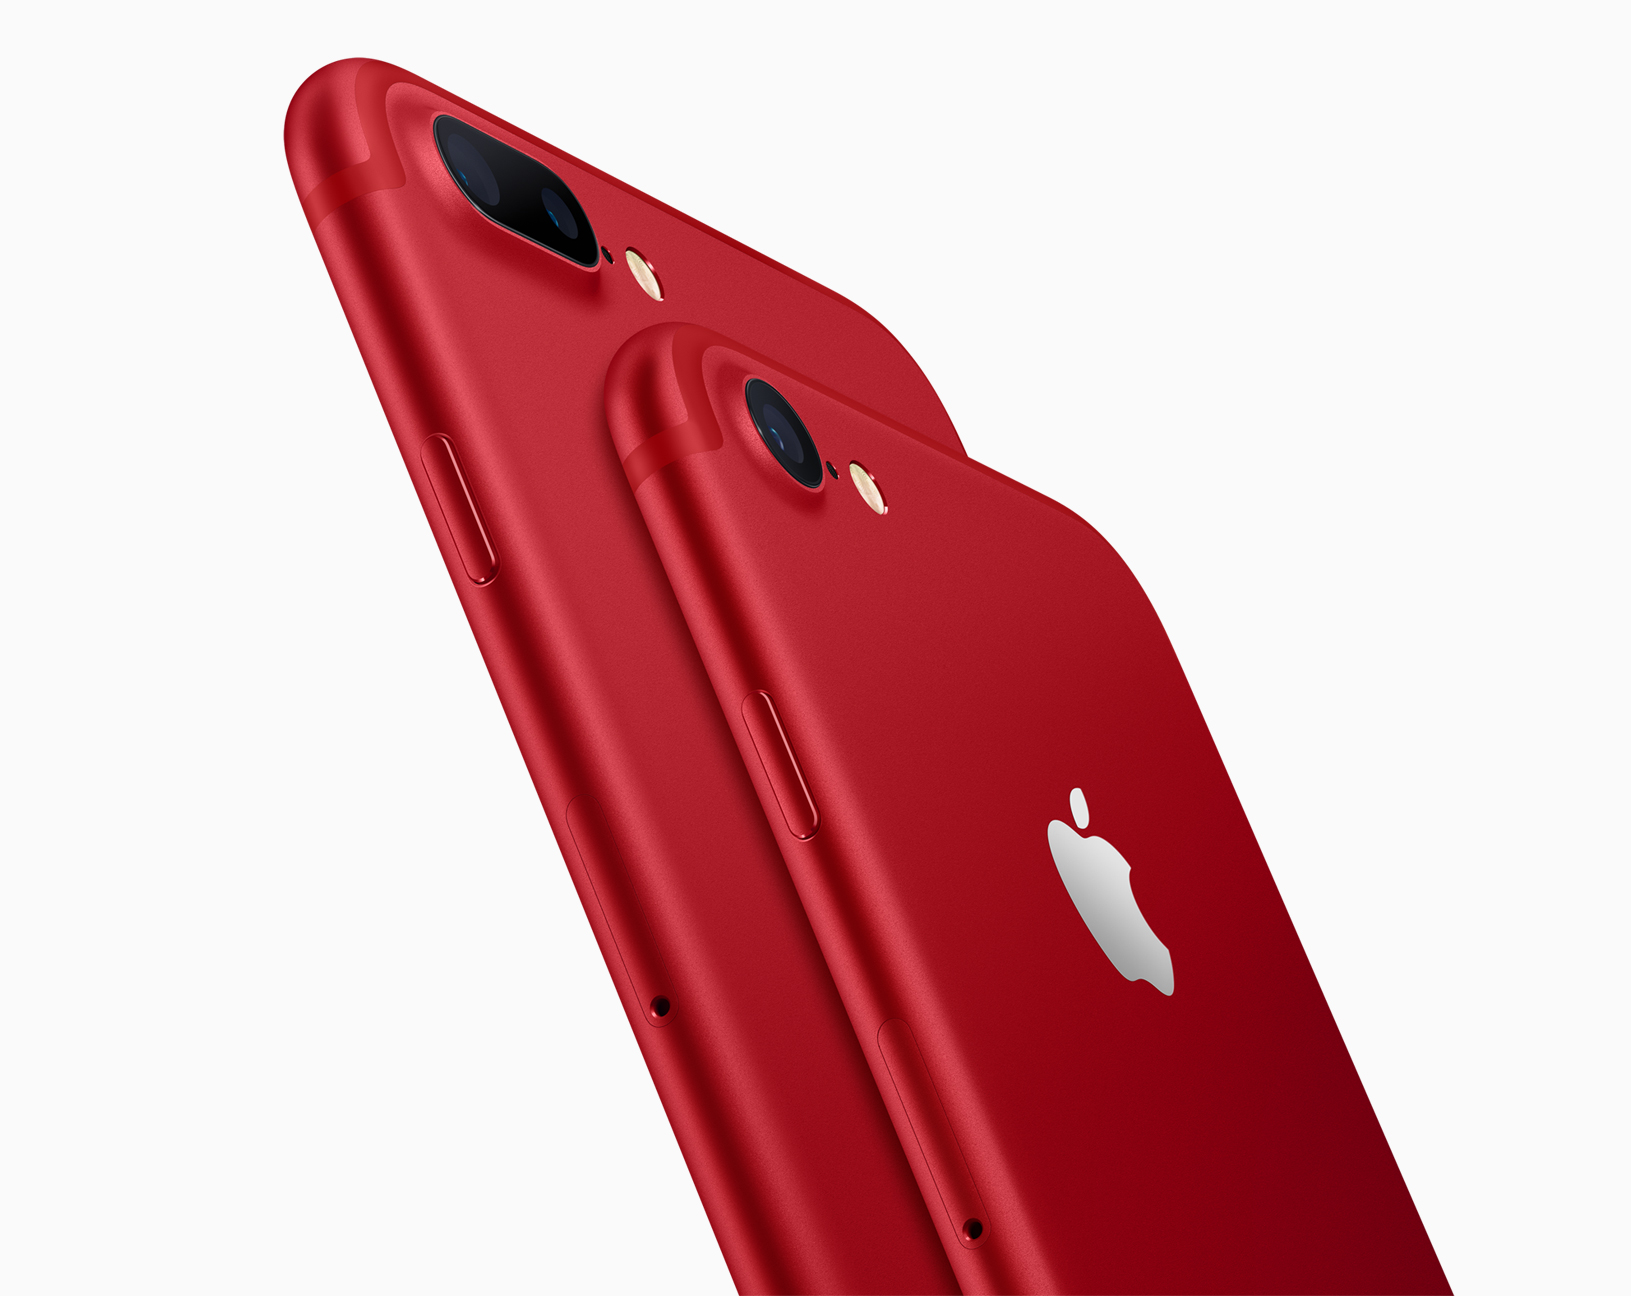 News: iPhone 7 and iPhone 7 Plus (PRODUCT)RED for HIV/AIDS